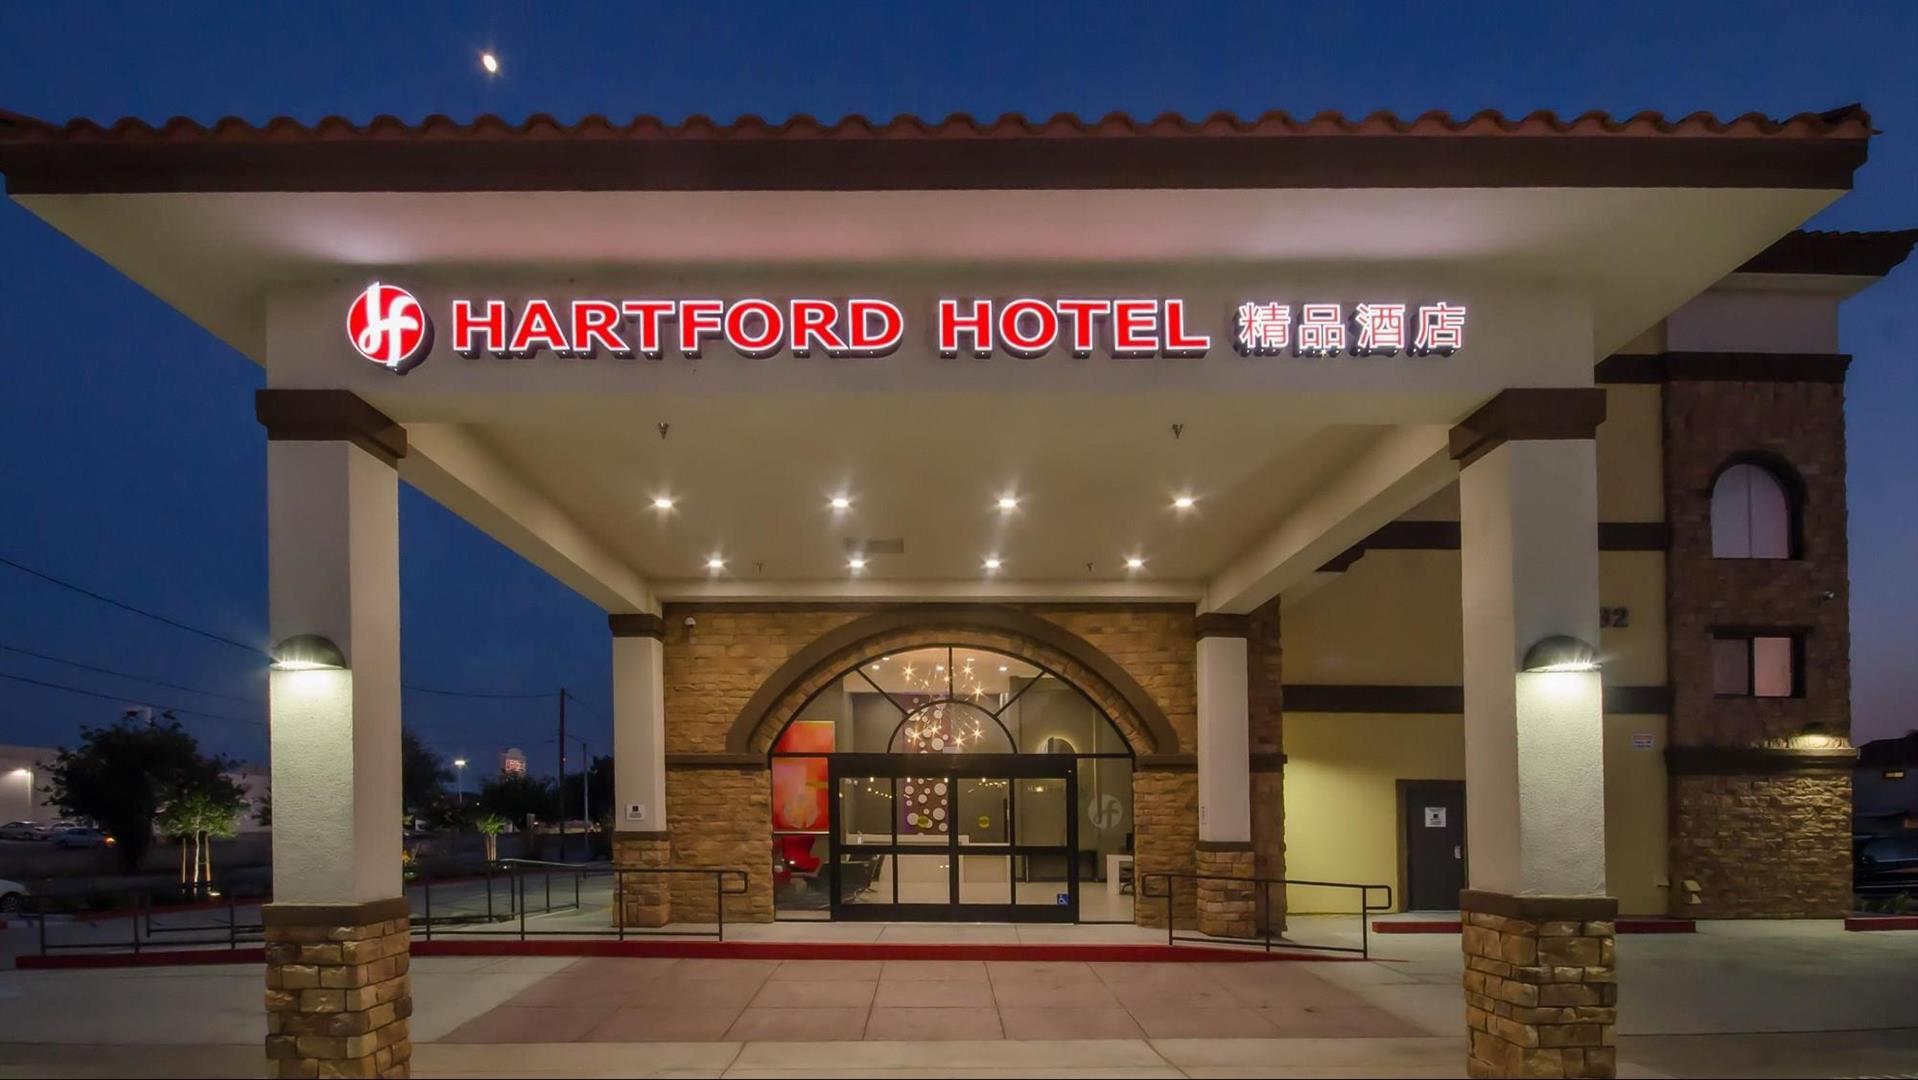 Hartford Hotel, BW Signature Collection in Rosemead, CA